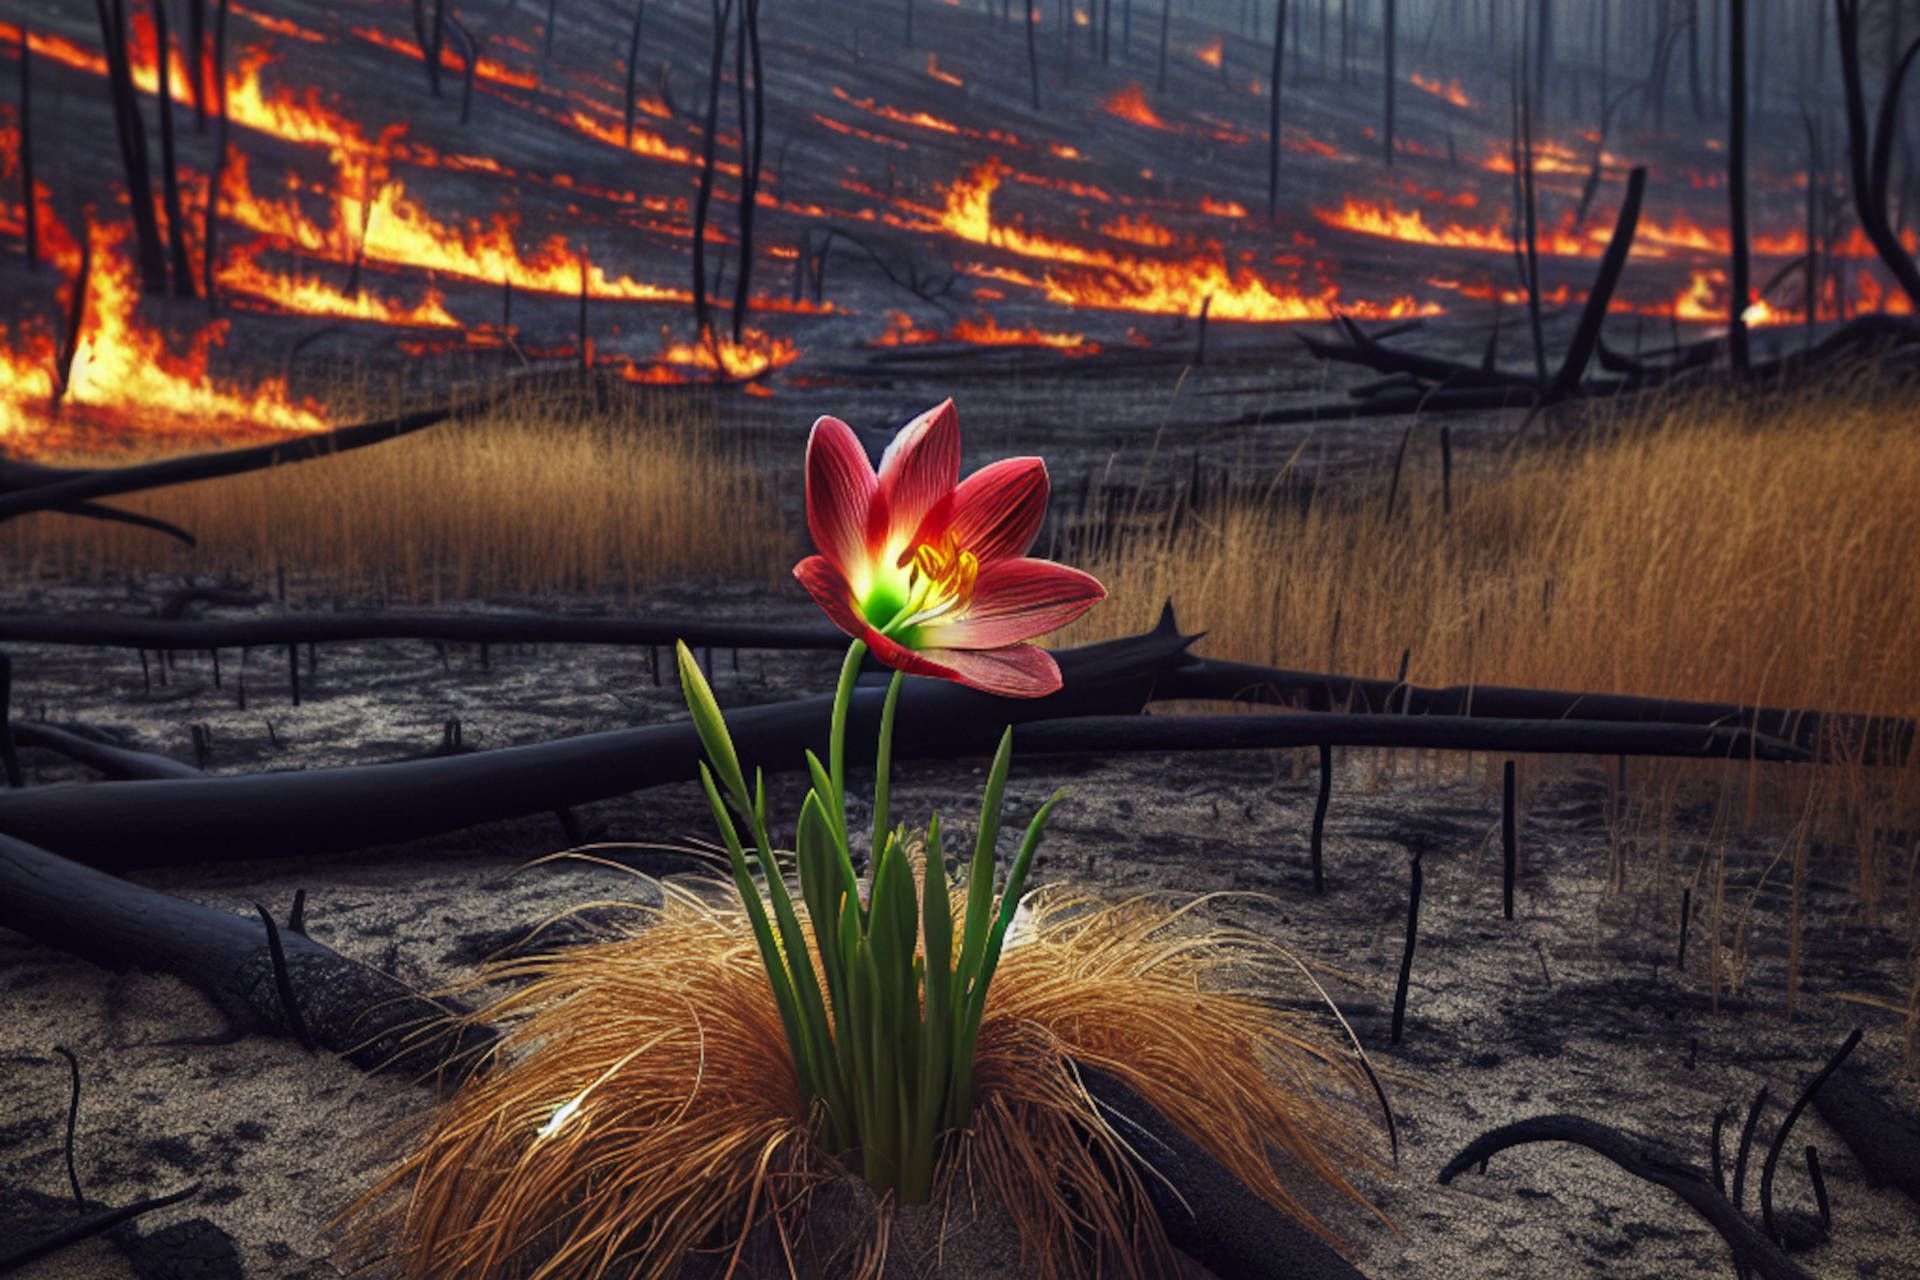 Which Flowers Often Appear After a Wildfire?